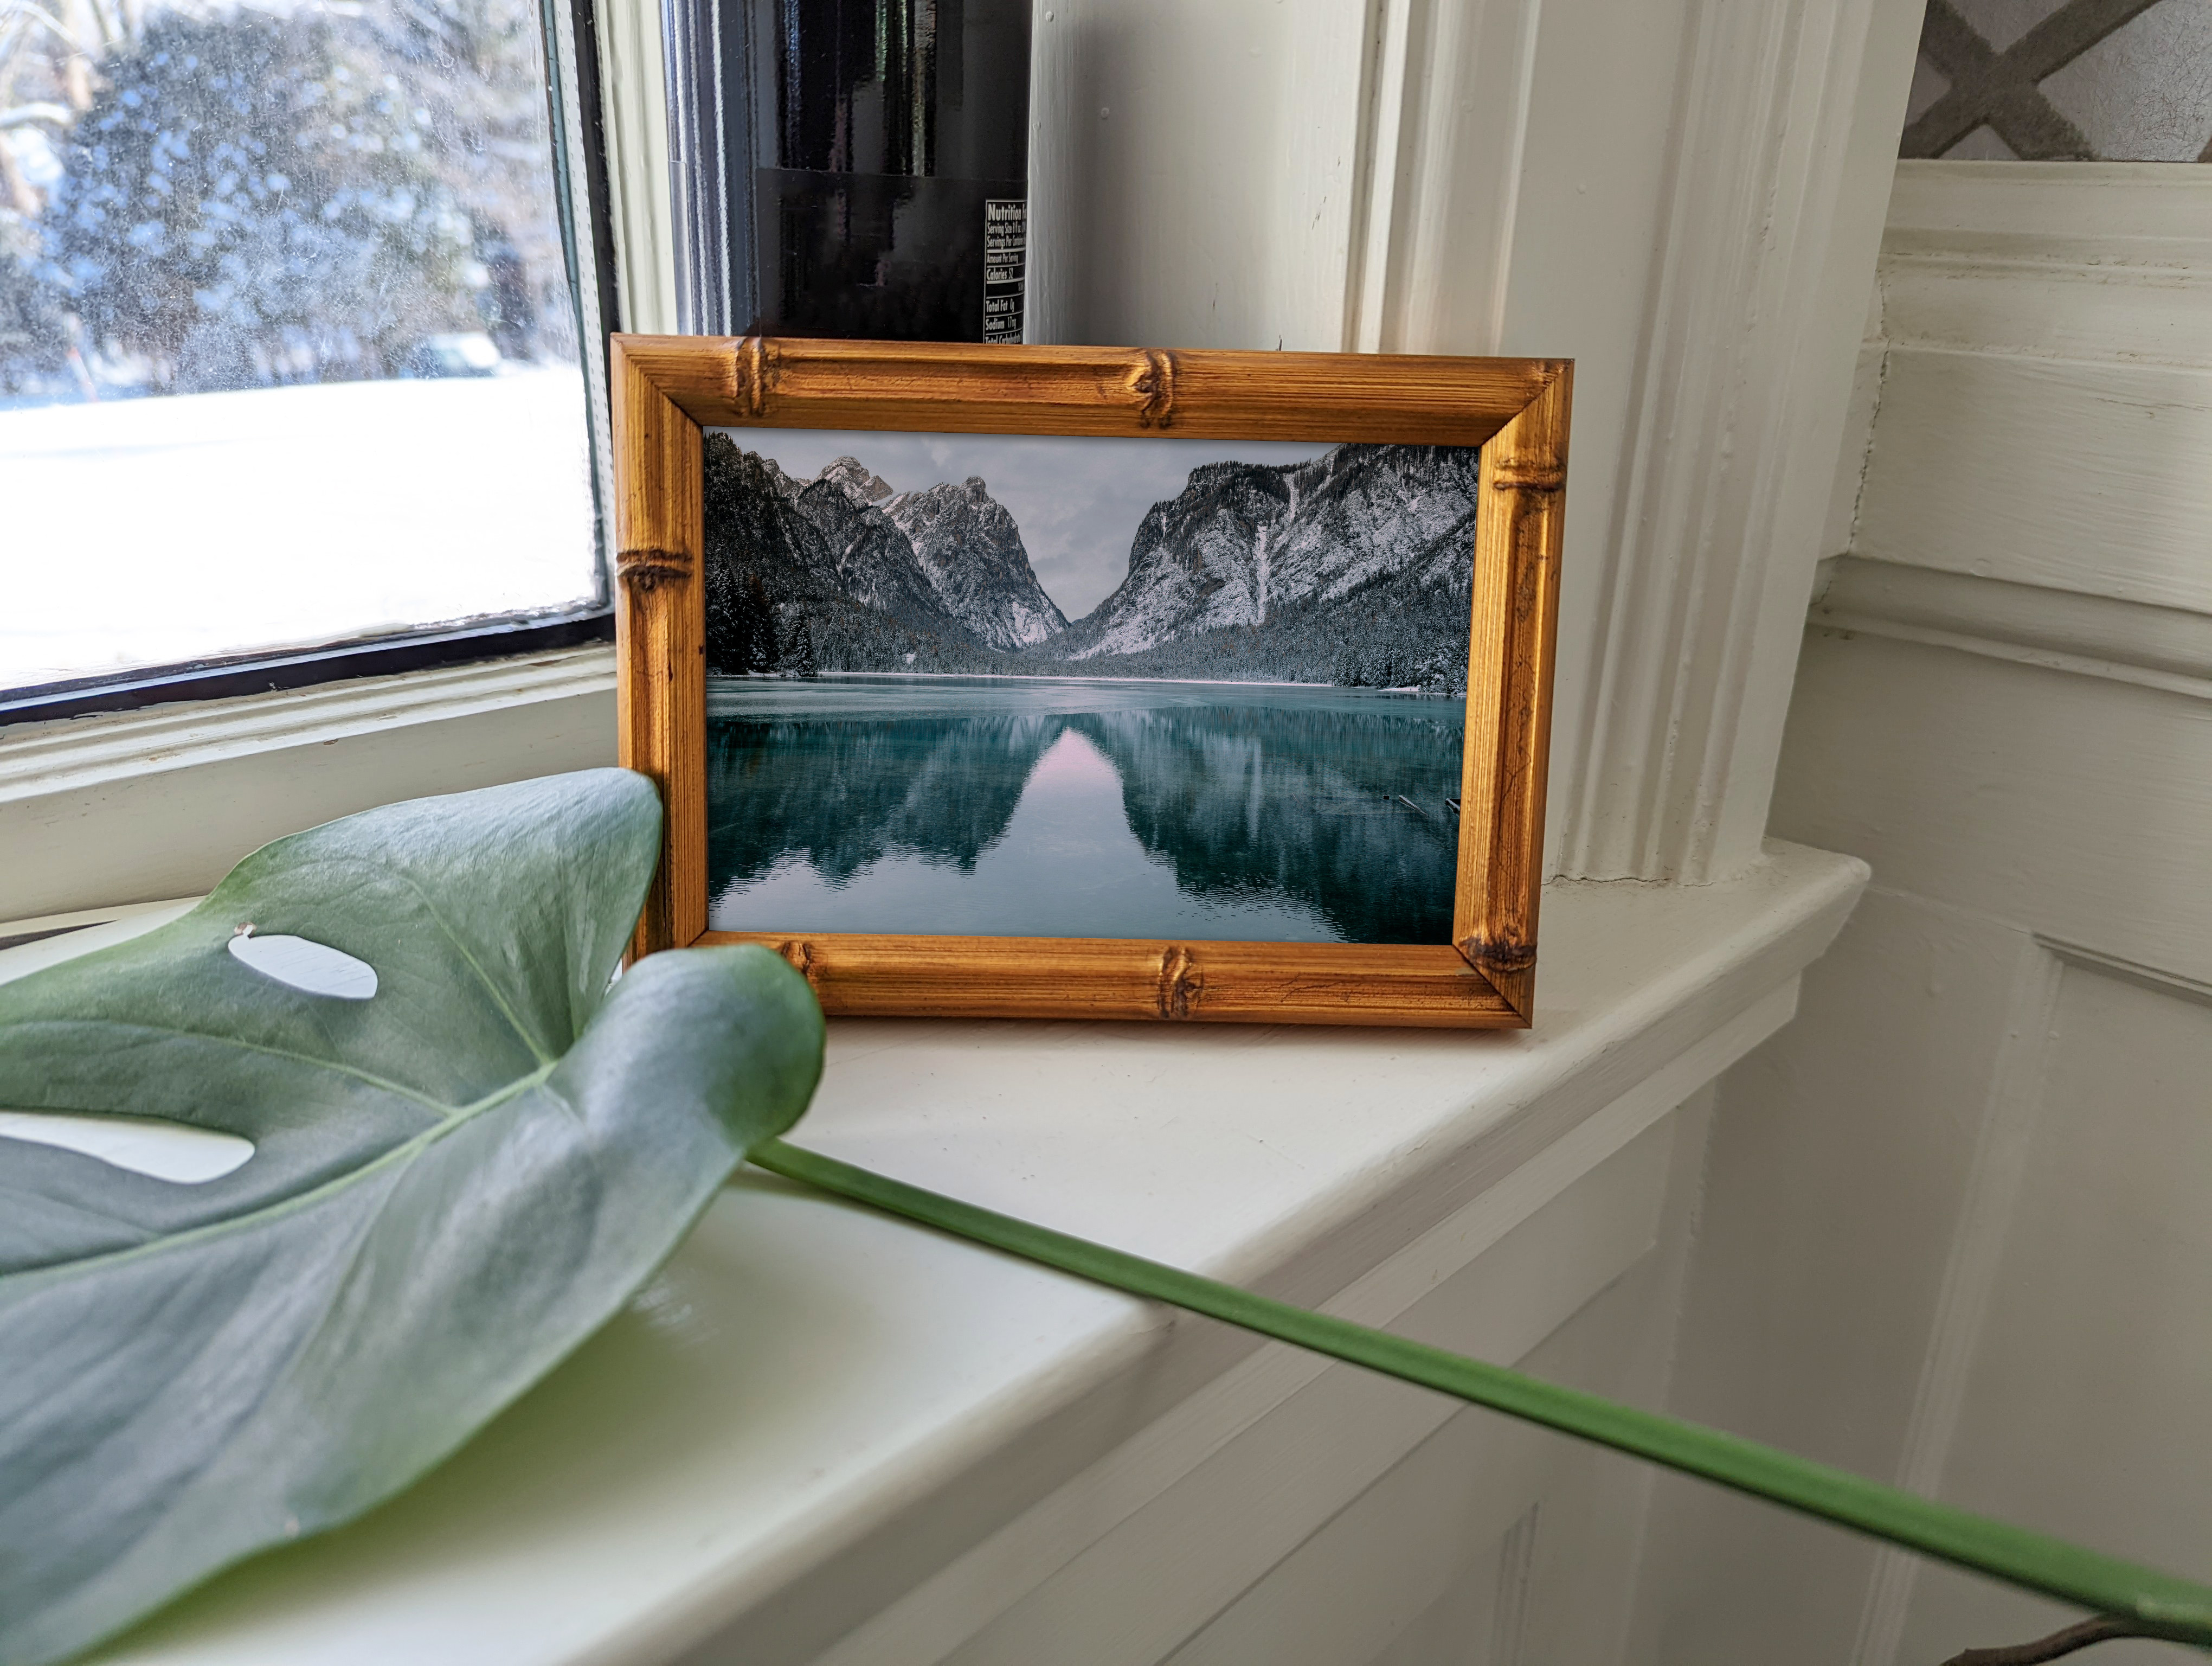 CustomPictureFrames.com 12x14 Frame Gold Real Wood Picture Frame Width 1.5 Inches | Interior Frame Depth 0.5 Inches | Bhutan Bamboo Photo Frame